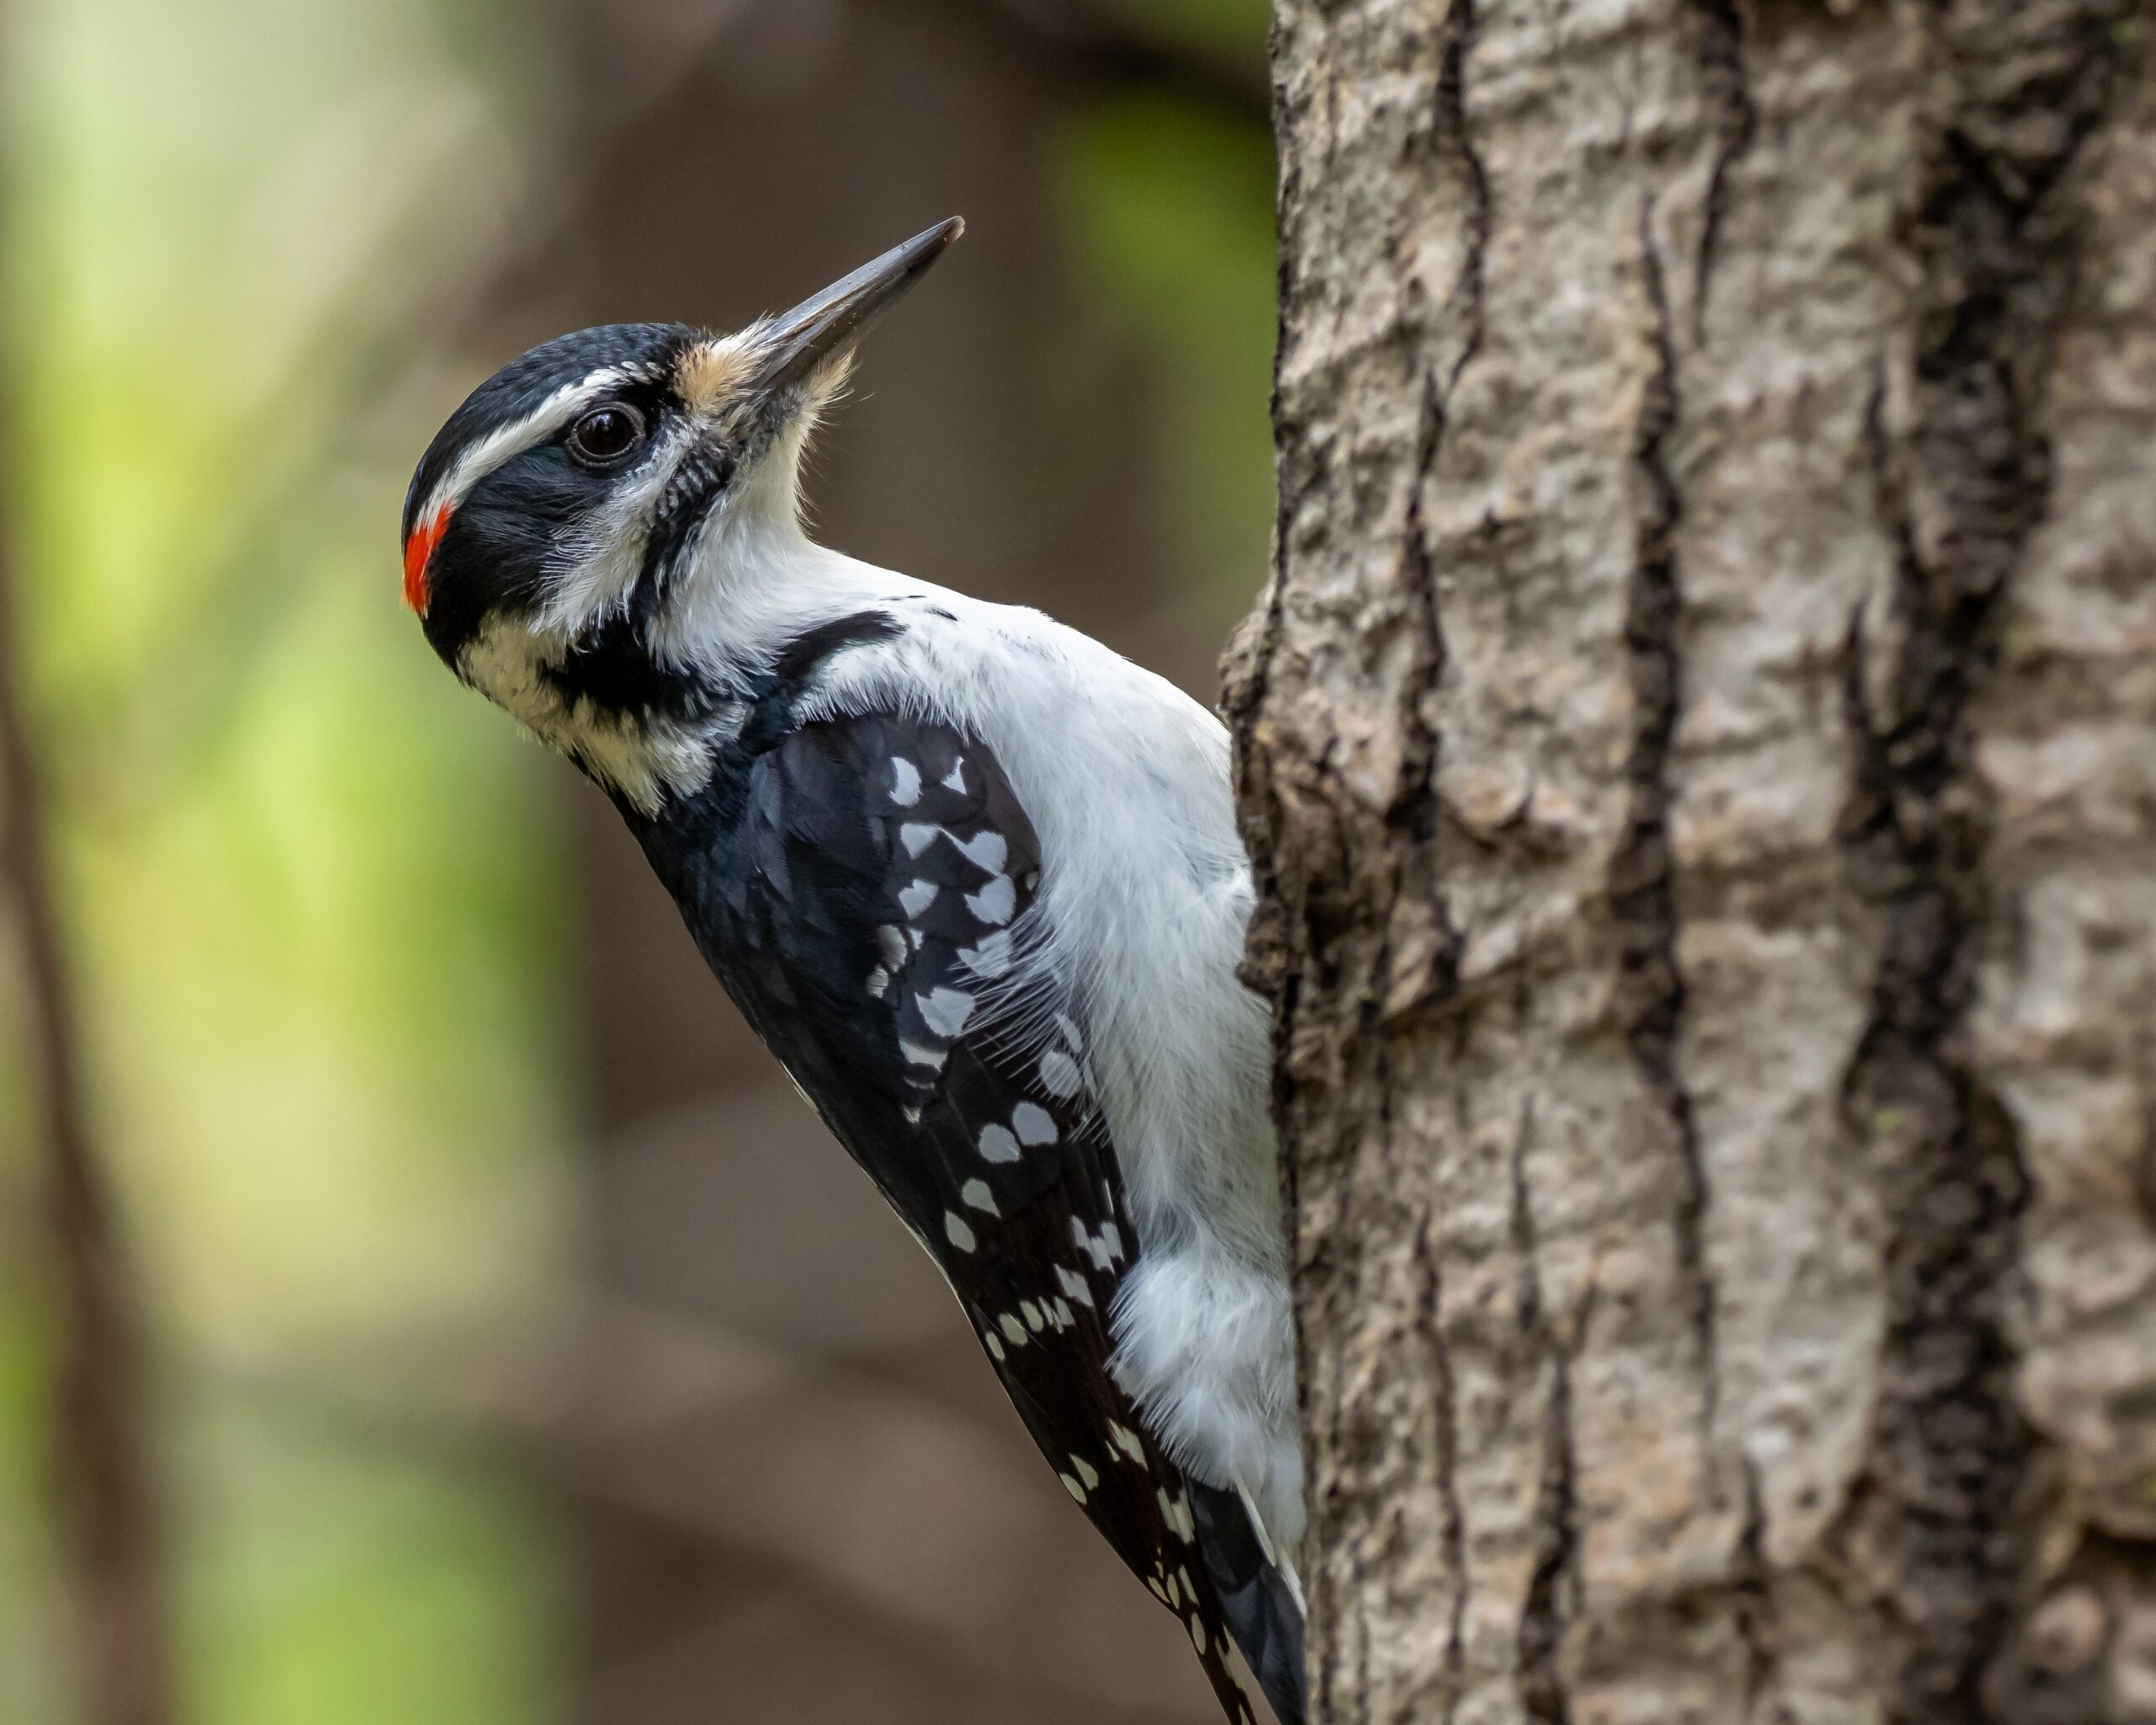 The Hairy Woodpecker: A Closer Look at Its Distinctive Features